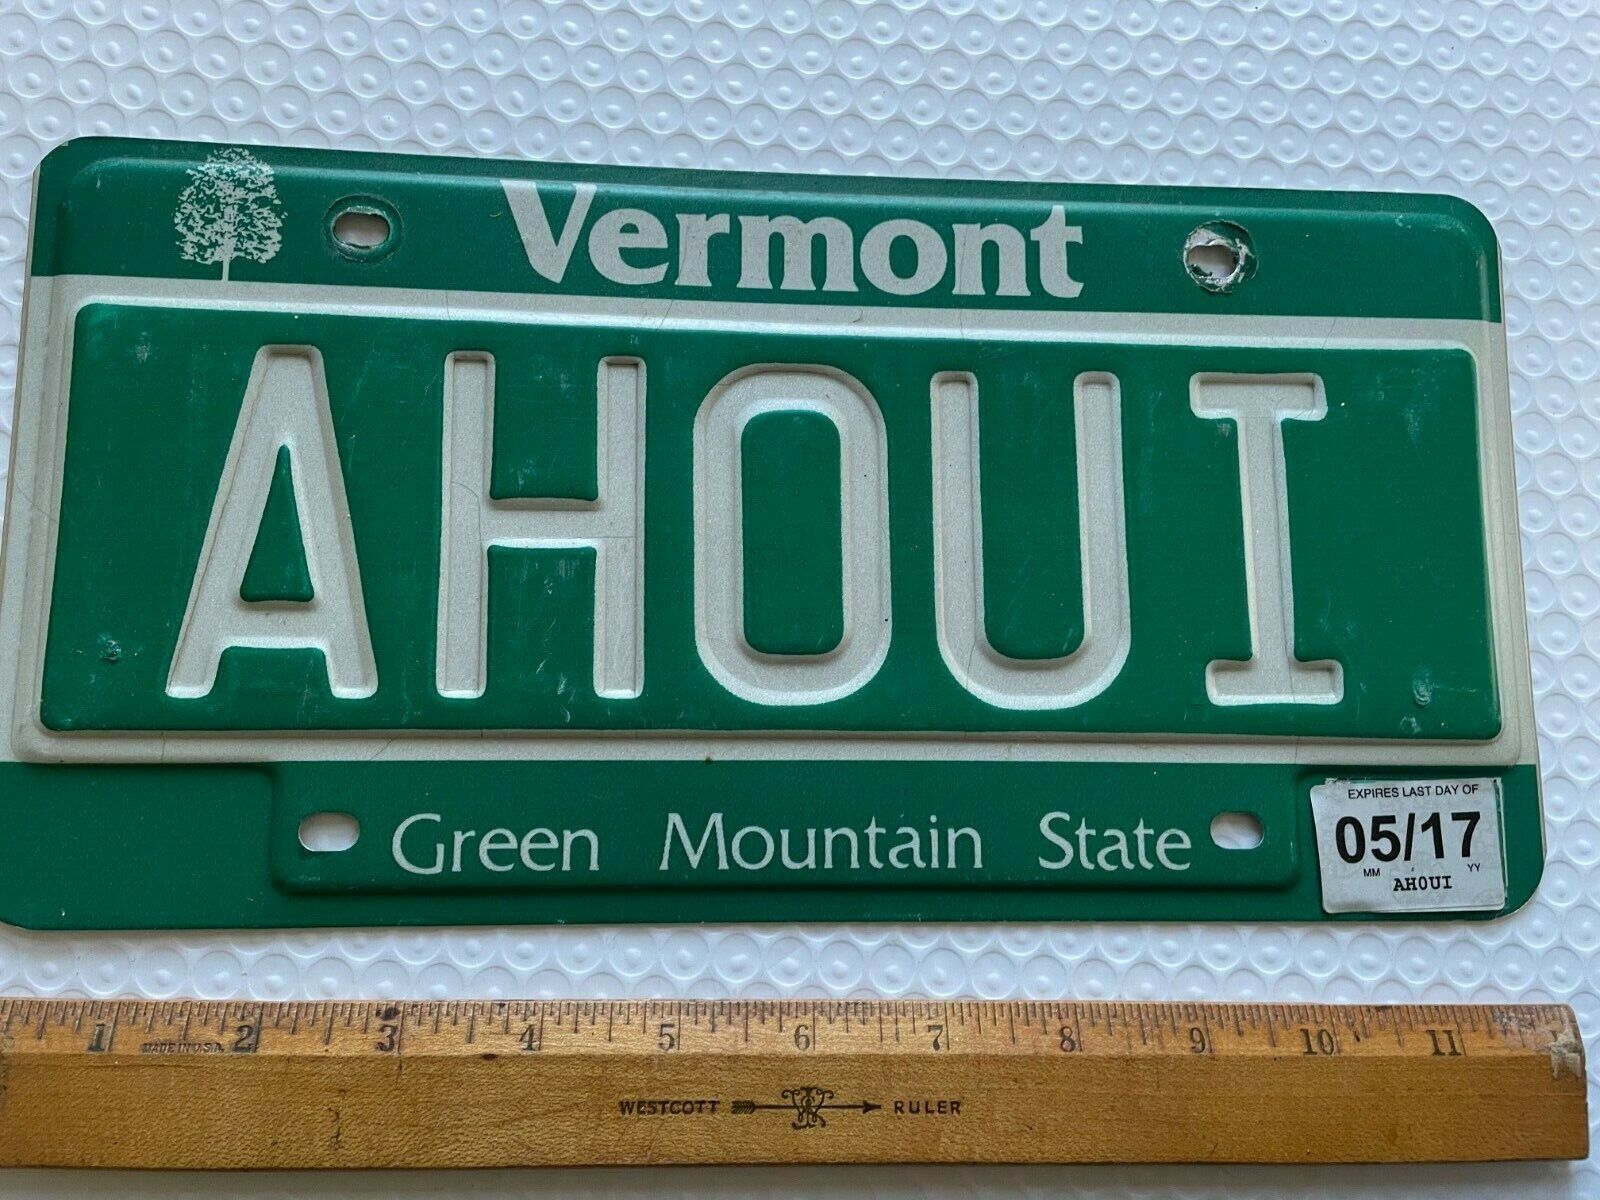 Vermont Vt Vanity License Plate Ahoui Ah Oui Oh Yes French (vv2)